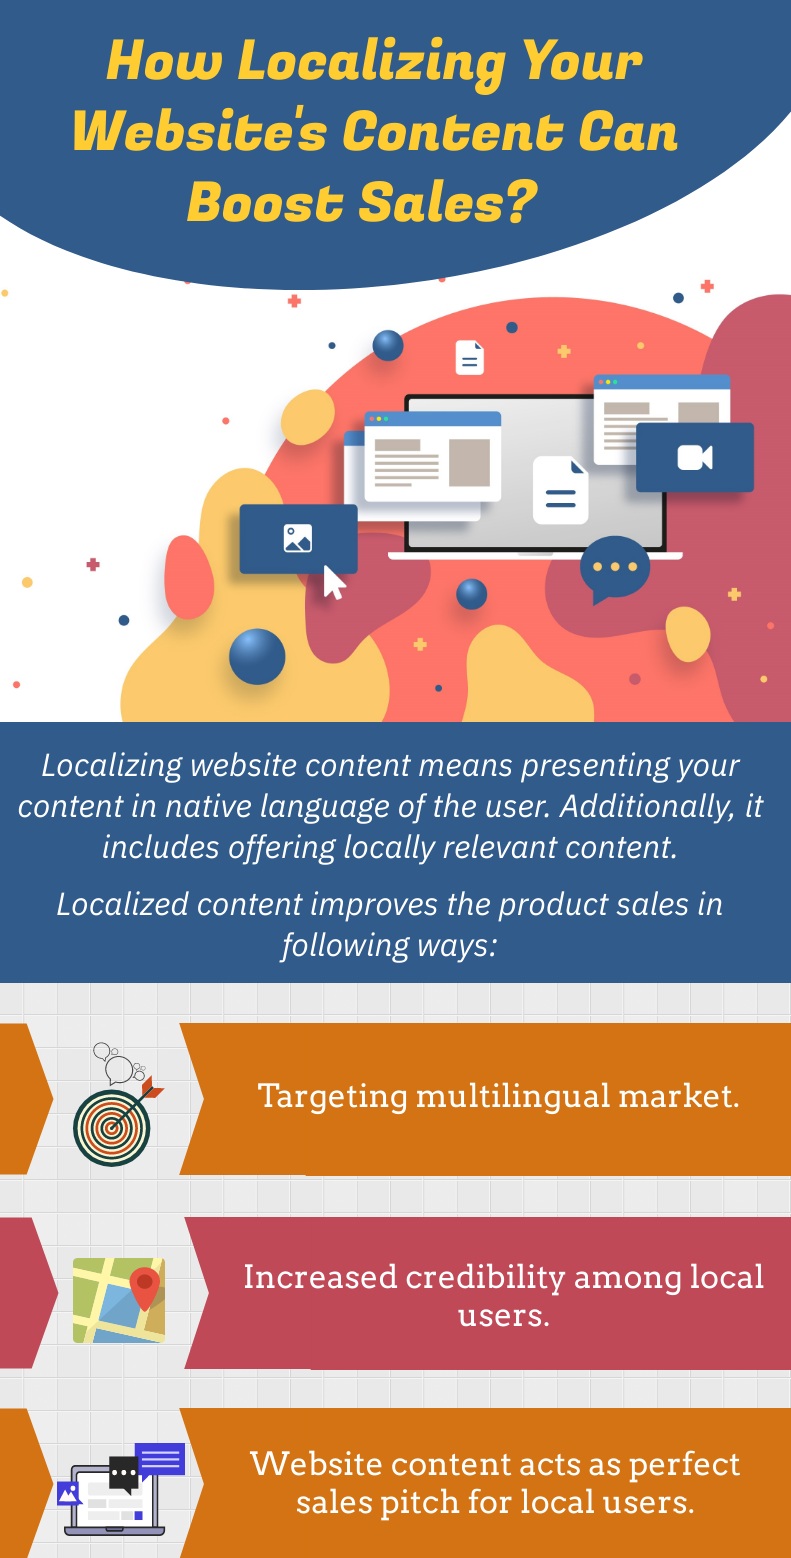 How-Localizing-Your-Websites-Content-Can-Boost-Sales